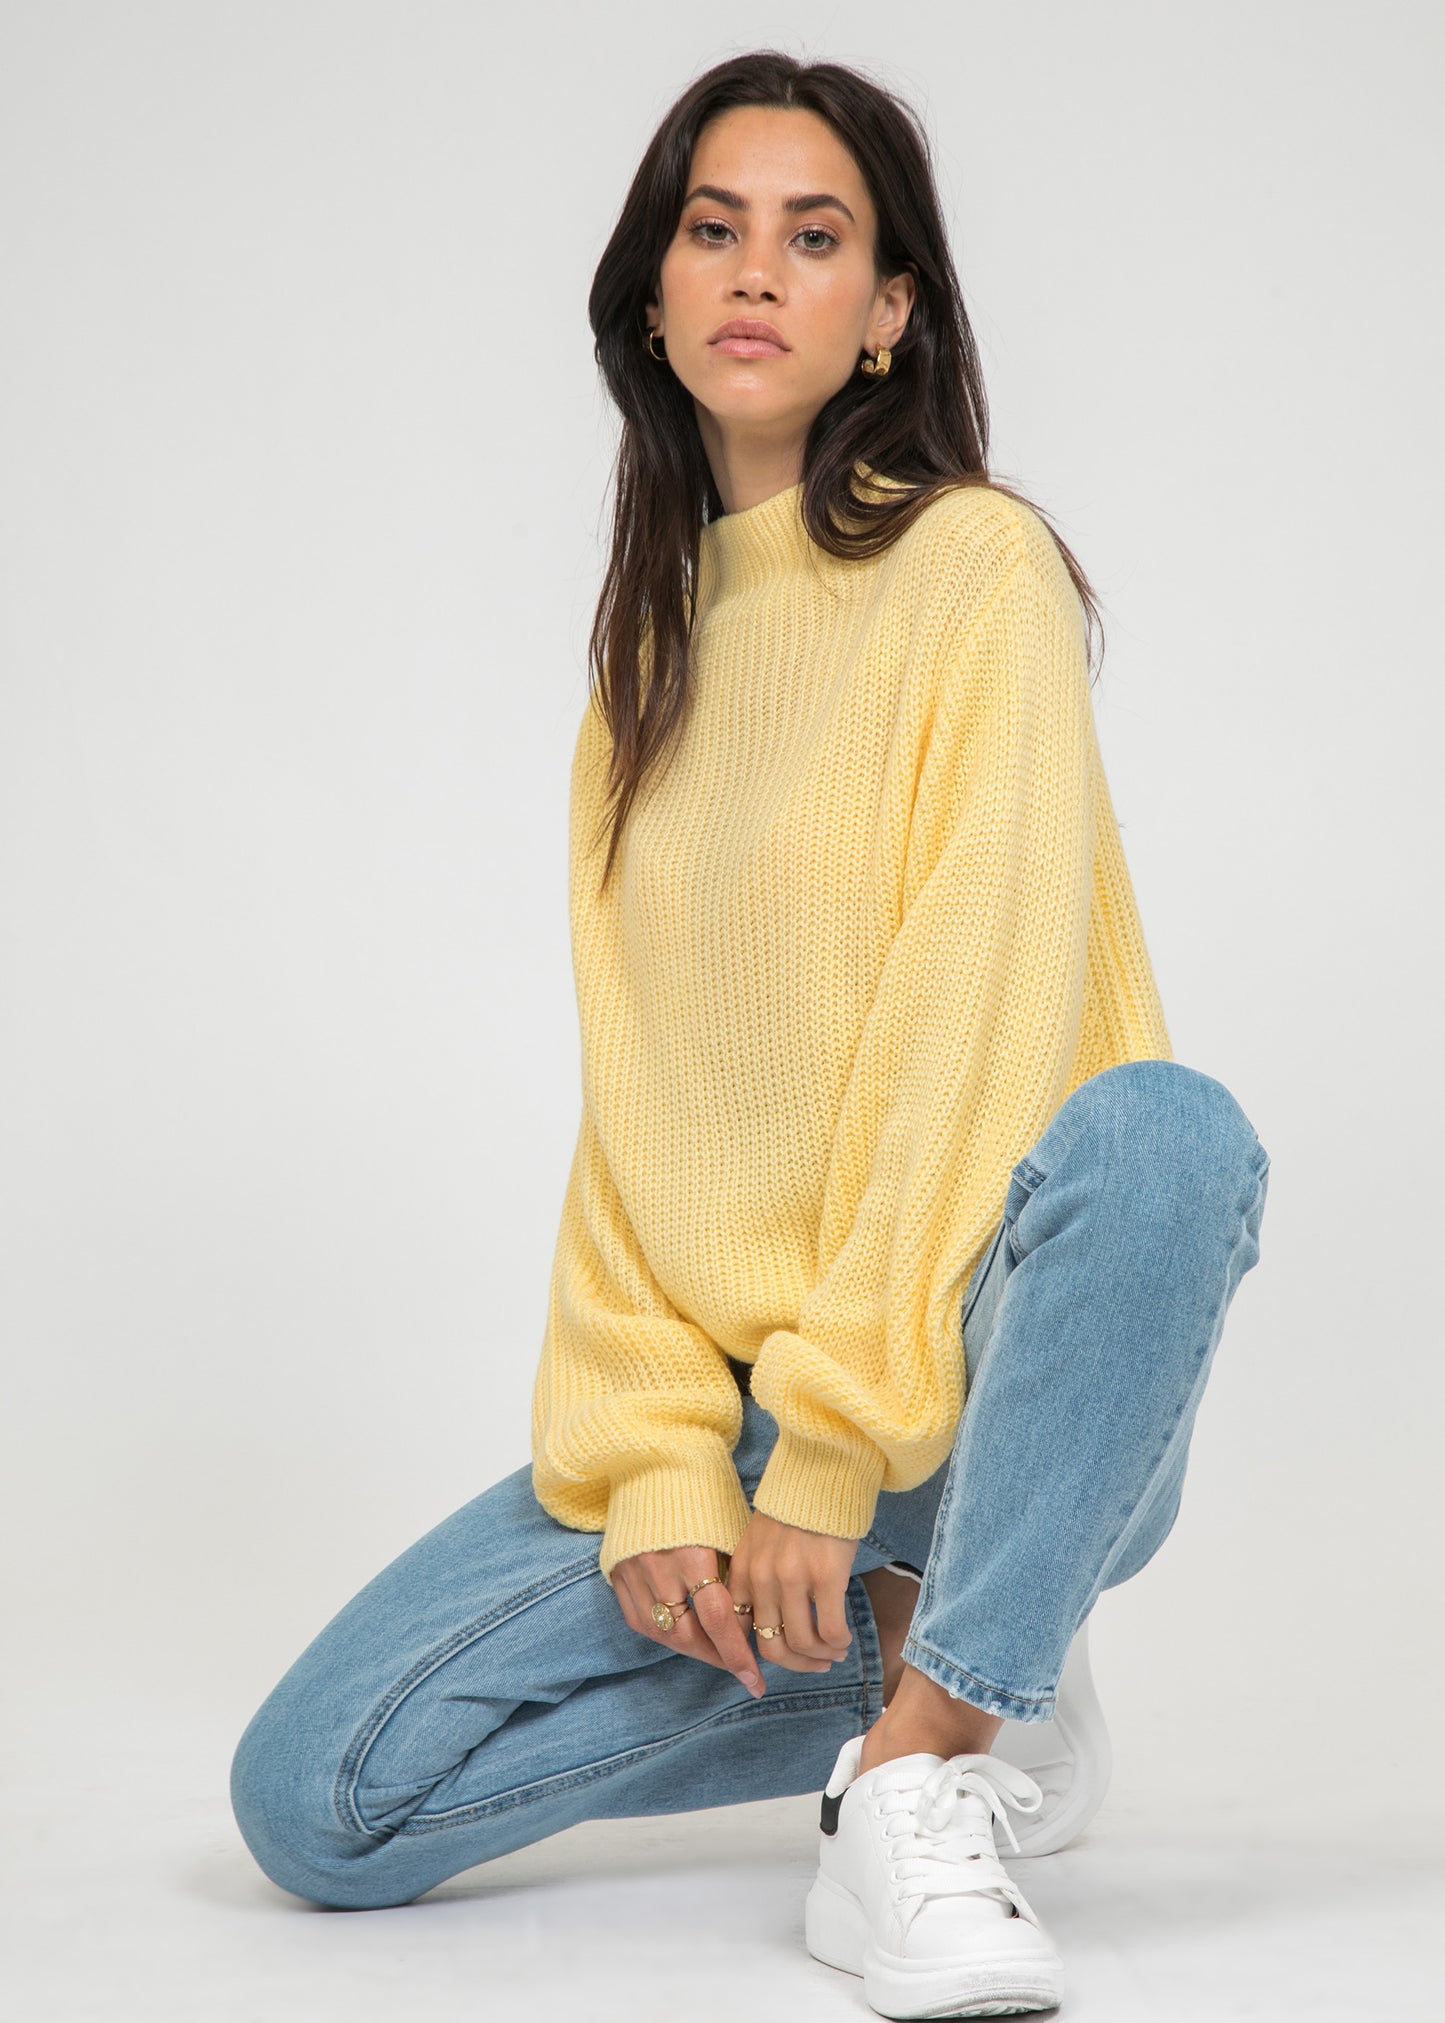 Oversize high neck jumper in yellow